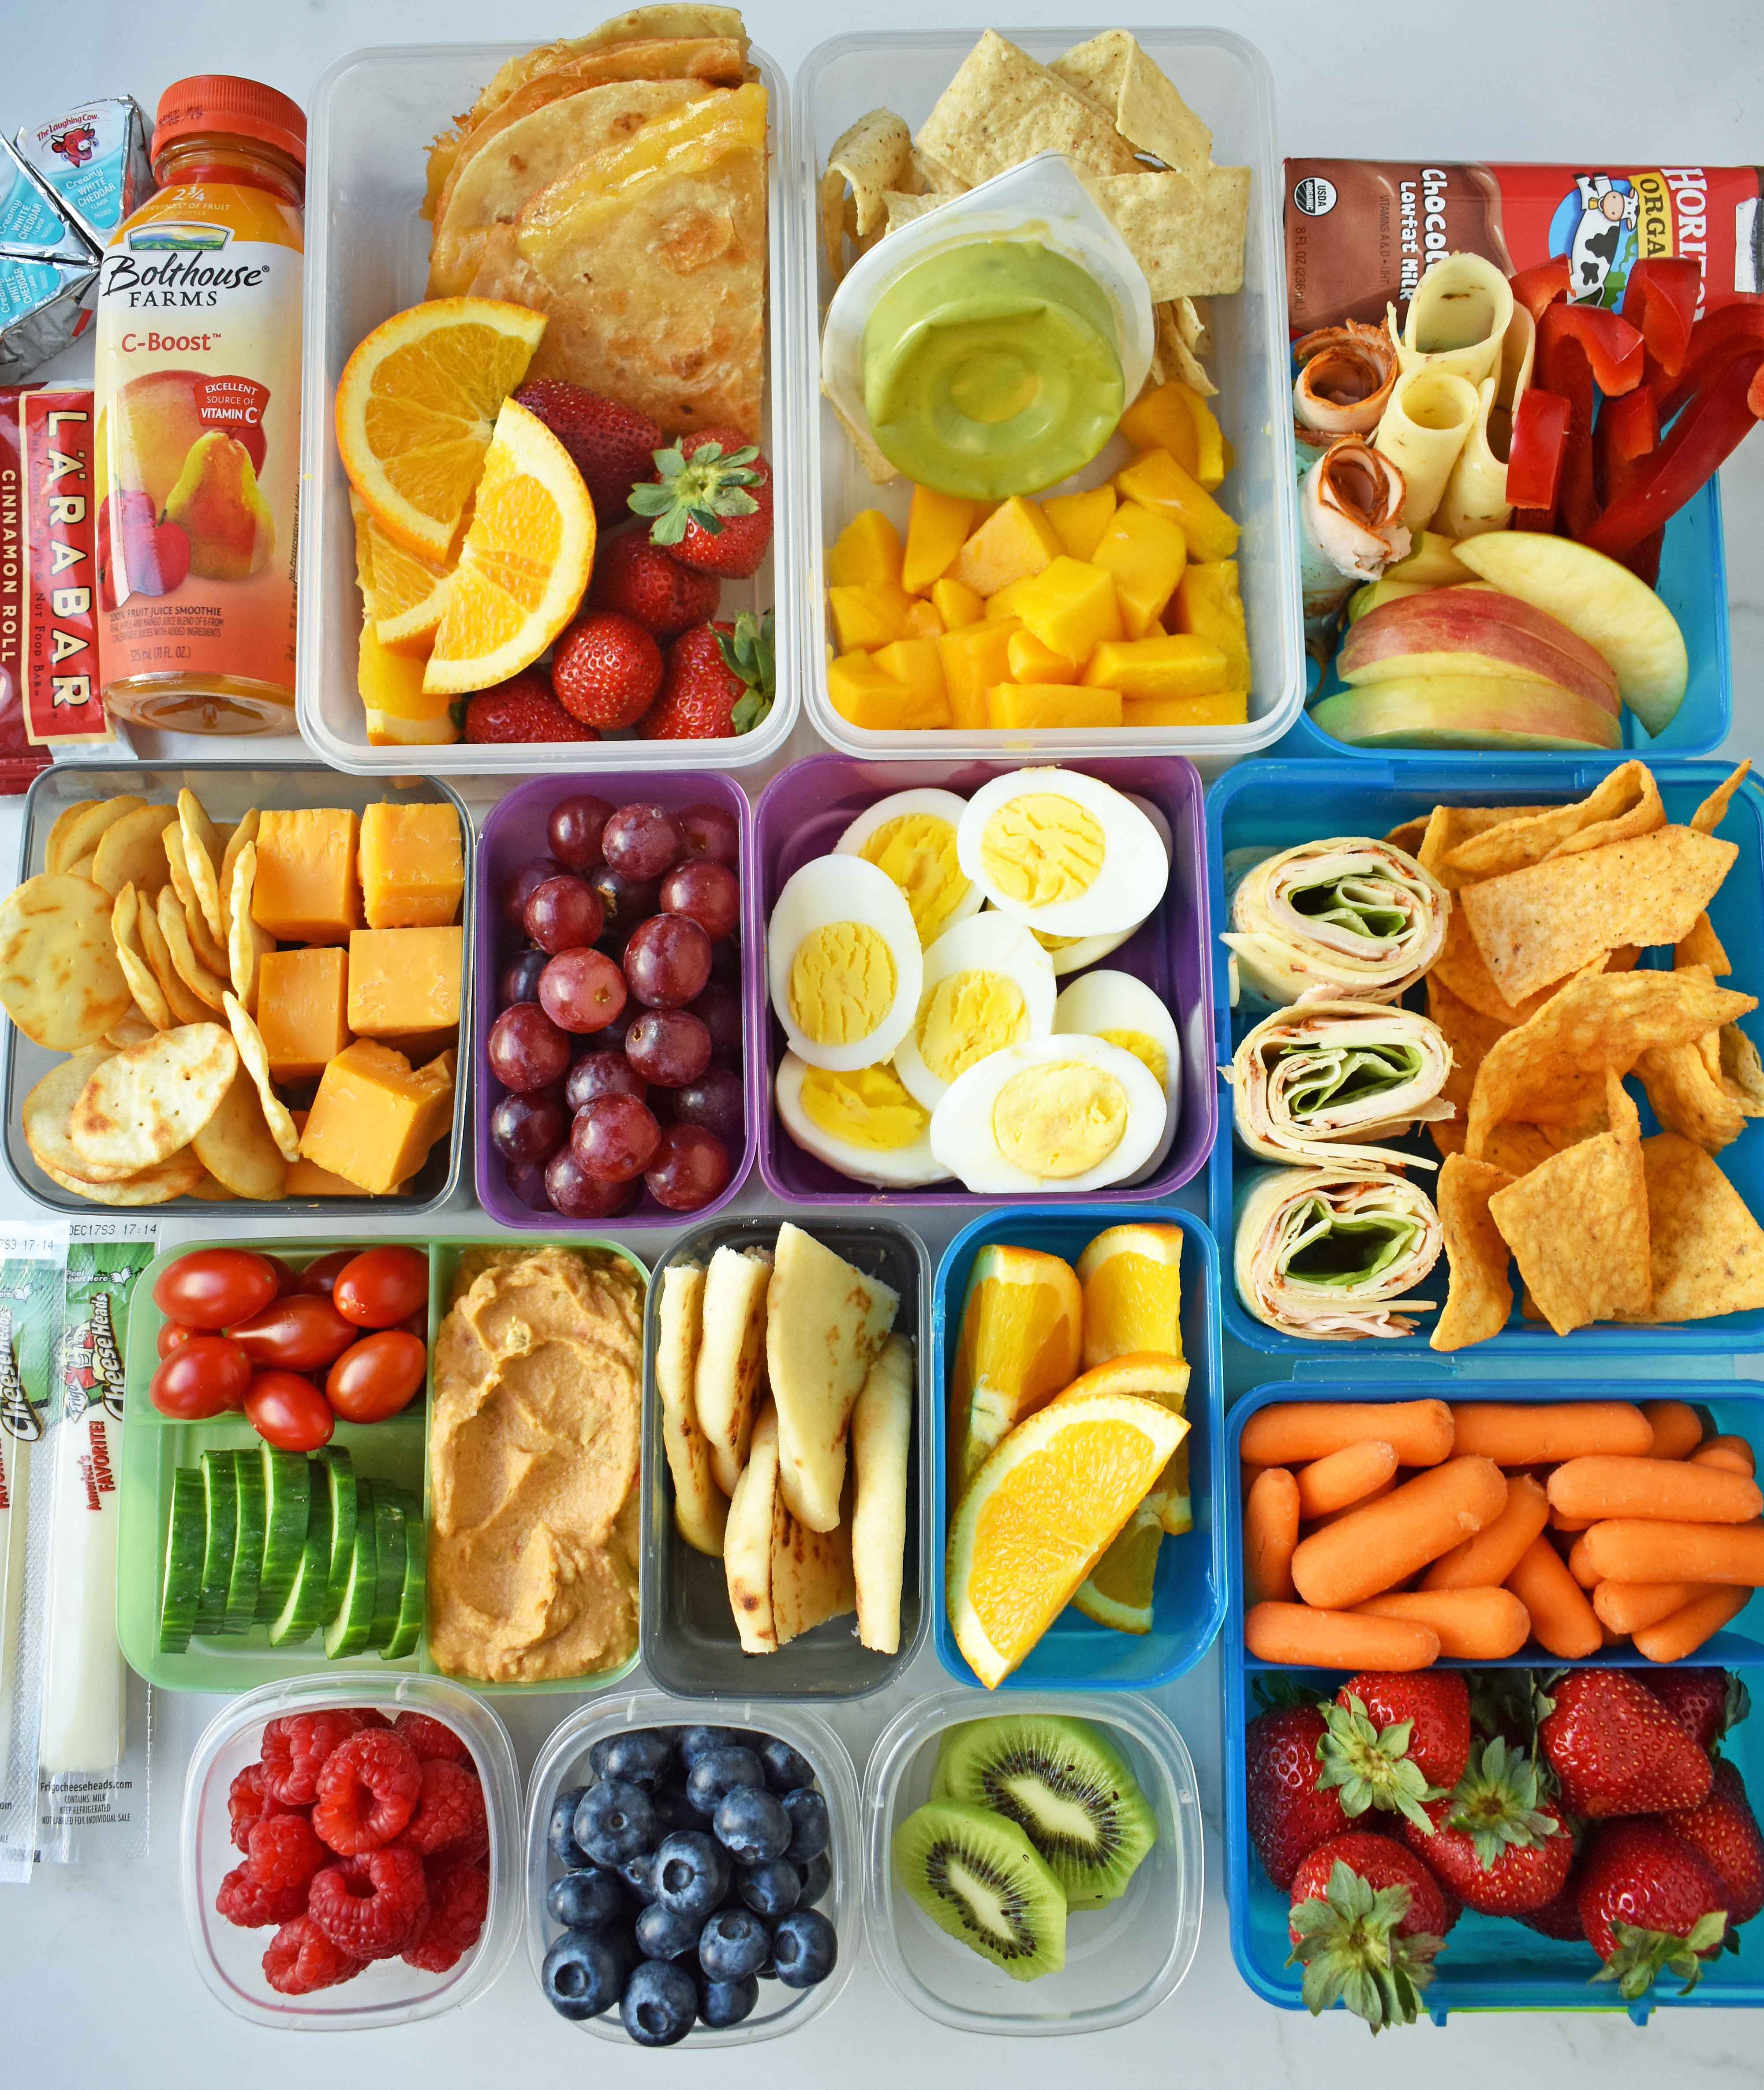 Back to School Kids Lunch Ideas. Healthy kids lunch ideas that includes wraps, roll-ups, sandwiches, quesadillas, gluten-free, meat and cheese kabobs, lunch snack ideas, and fresh fruits and veggies. Healthy lunch ideas by Modern Honey. f4vn.com